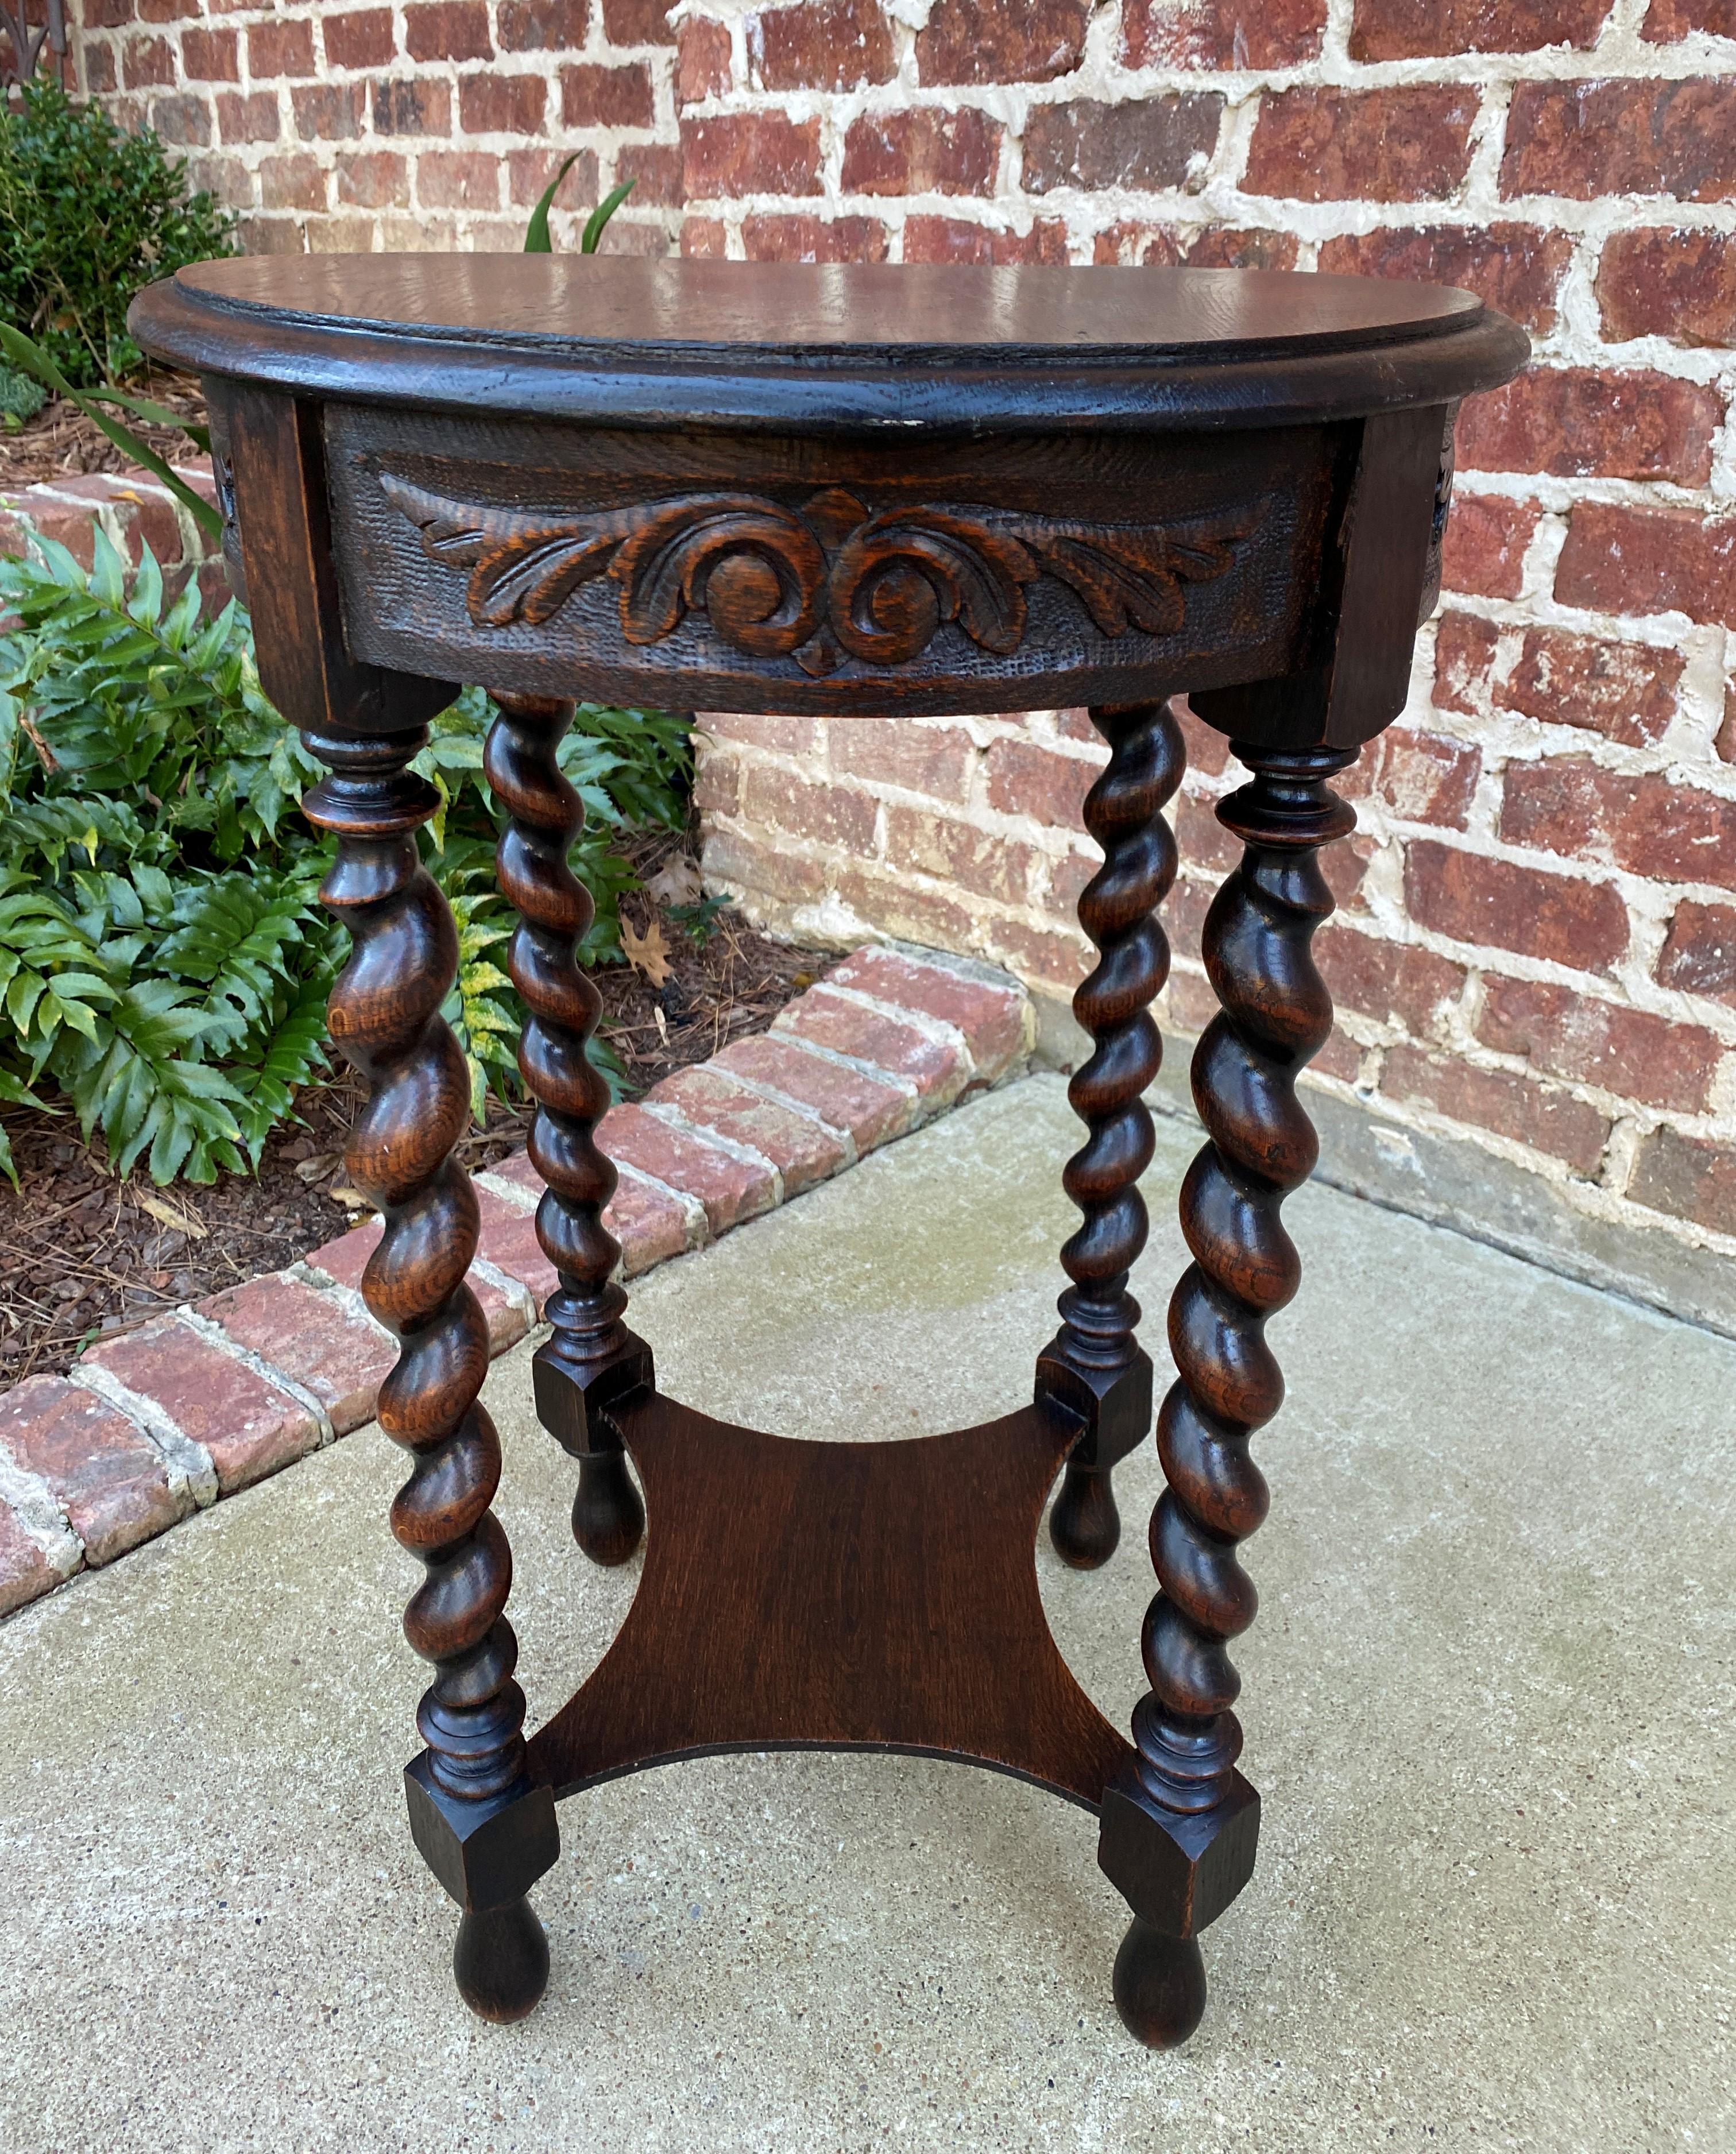 Antique English Round Table End Table Occasional Table Barley Twist Oak 2-Tier 6